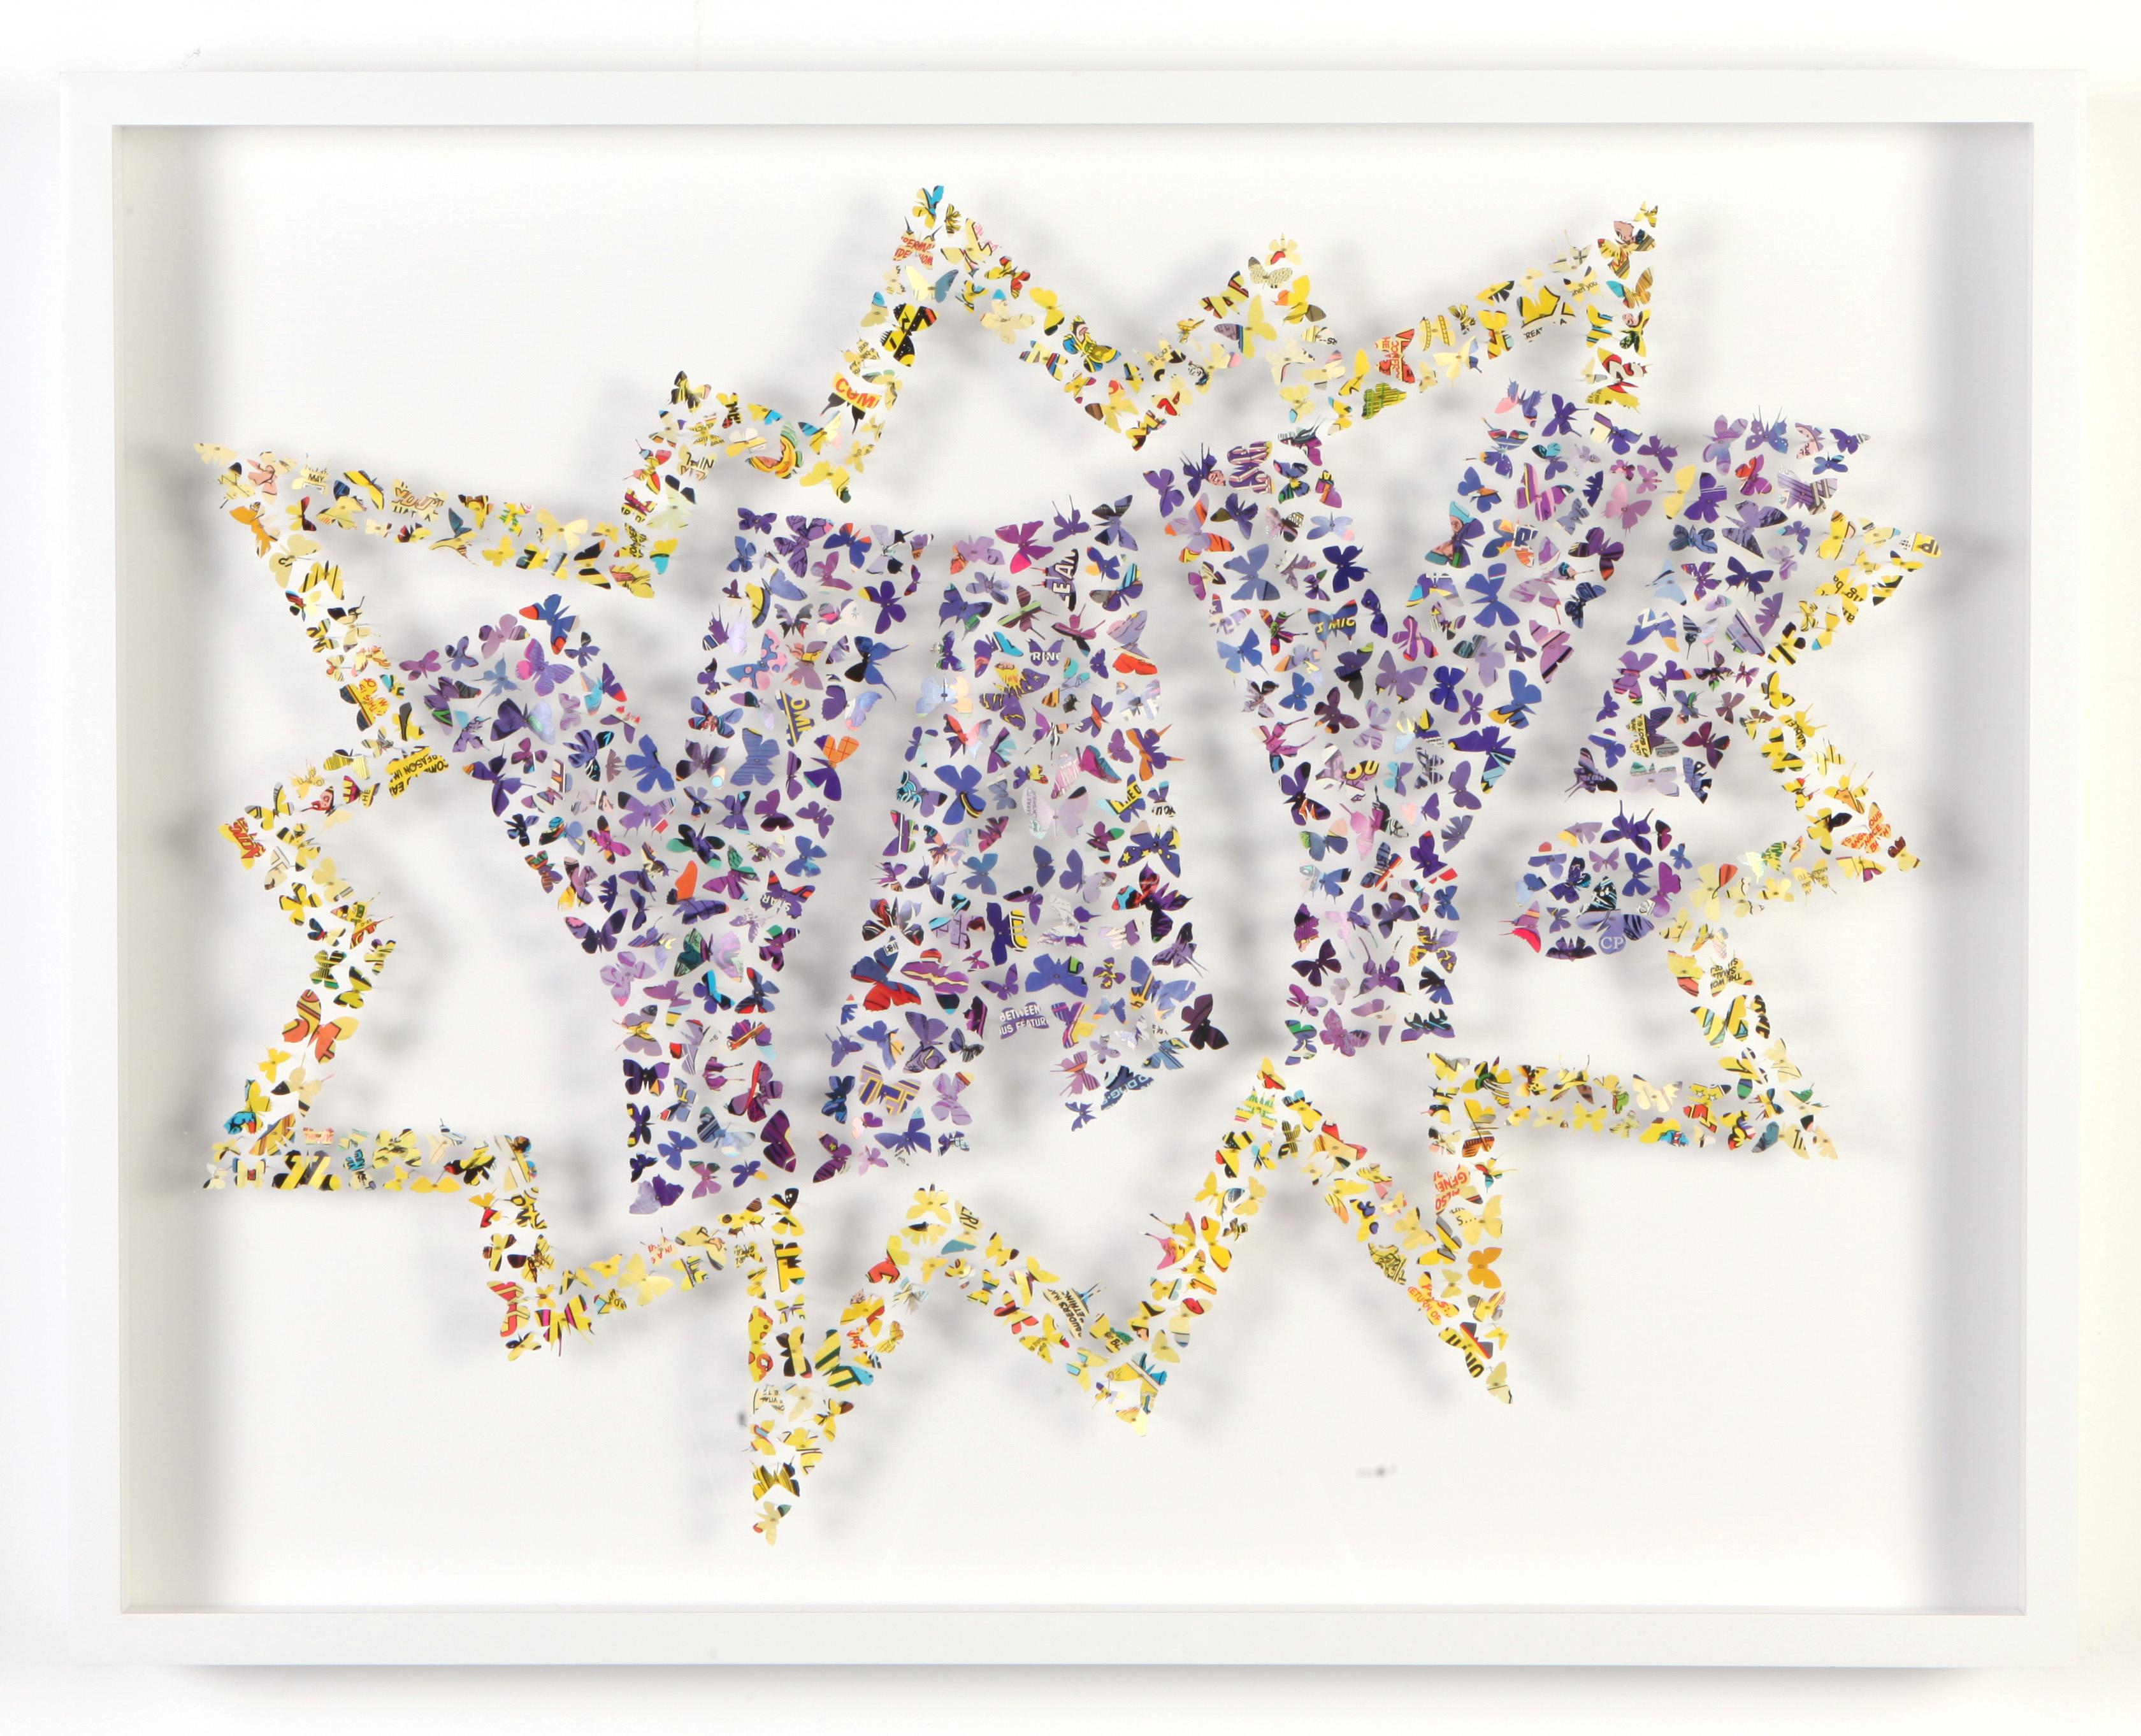 This work is sourced directly from the artist.
Butterflies cut from Vintage Comic Book Pages, arranged in the shape of the word YAY, and pinned with stainless steel entomology pins to canvas. Framed in a white powder-coated frame.

Available Sizes